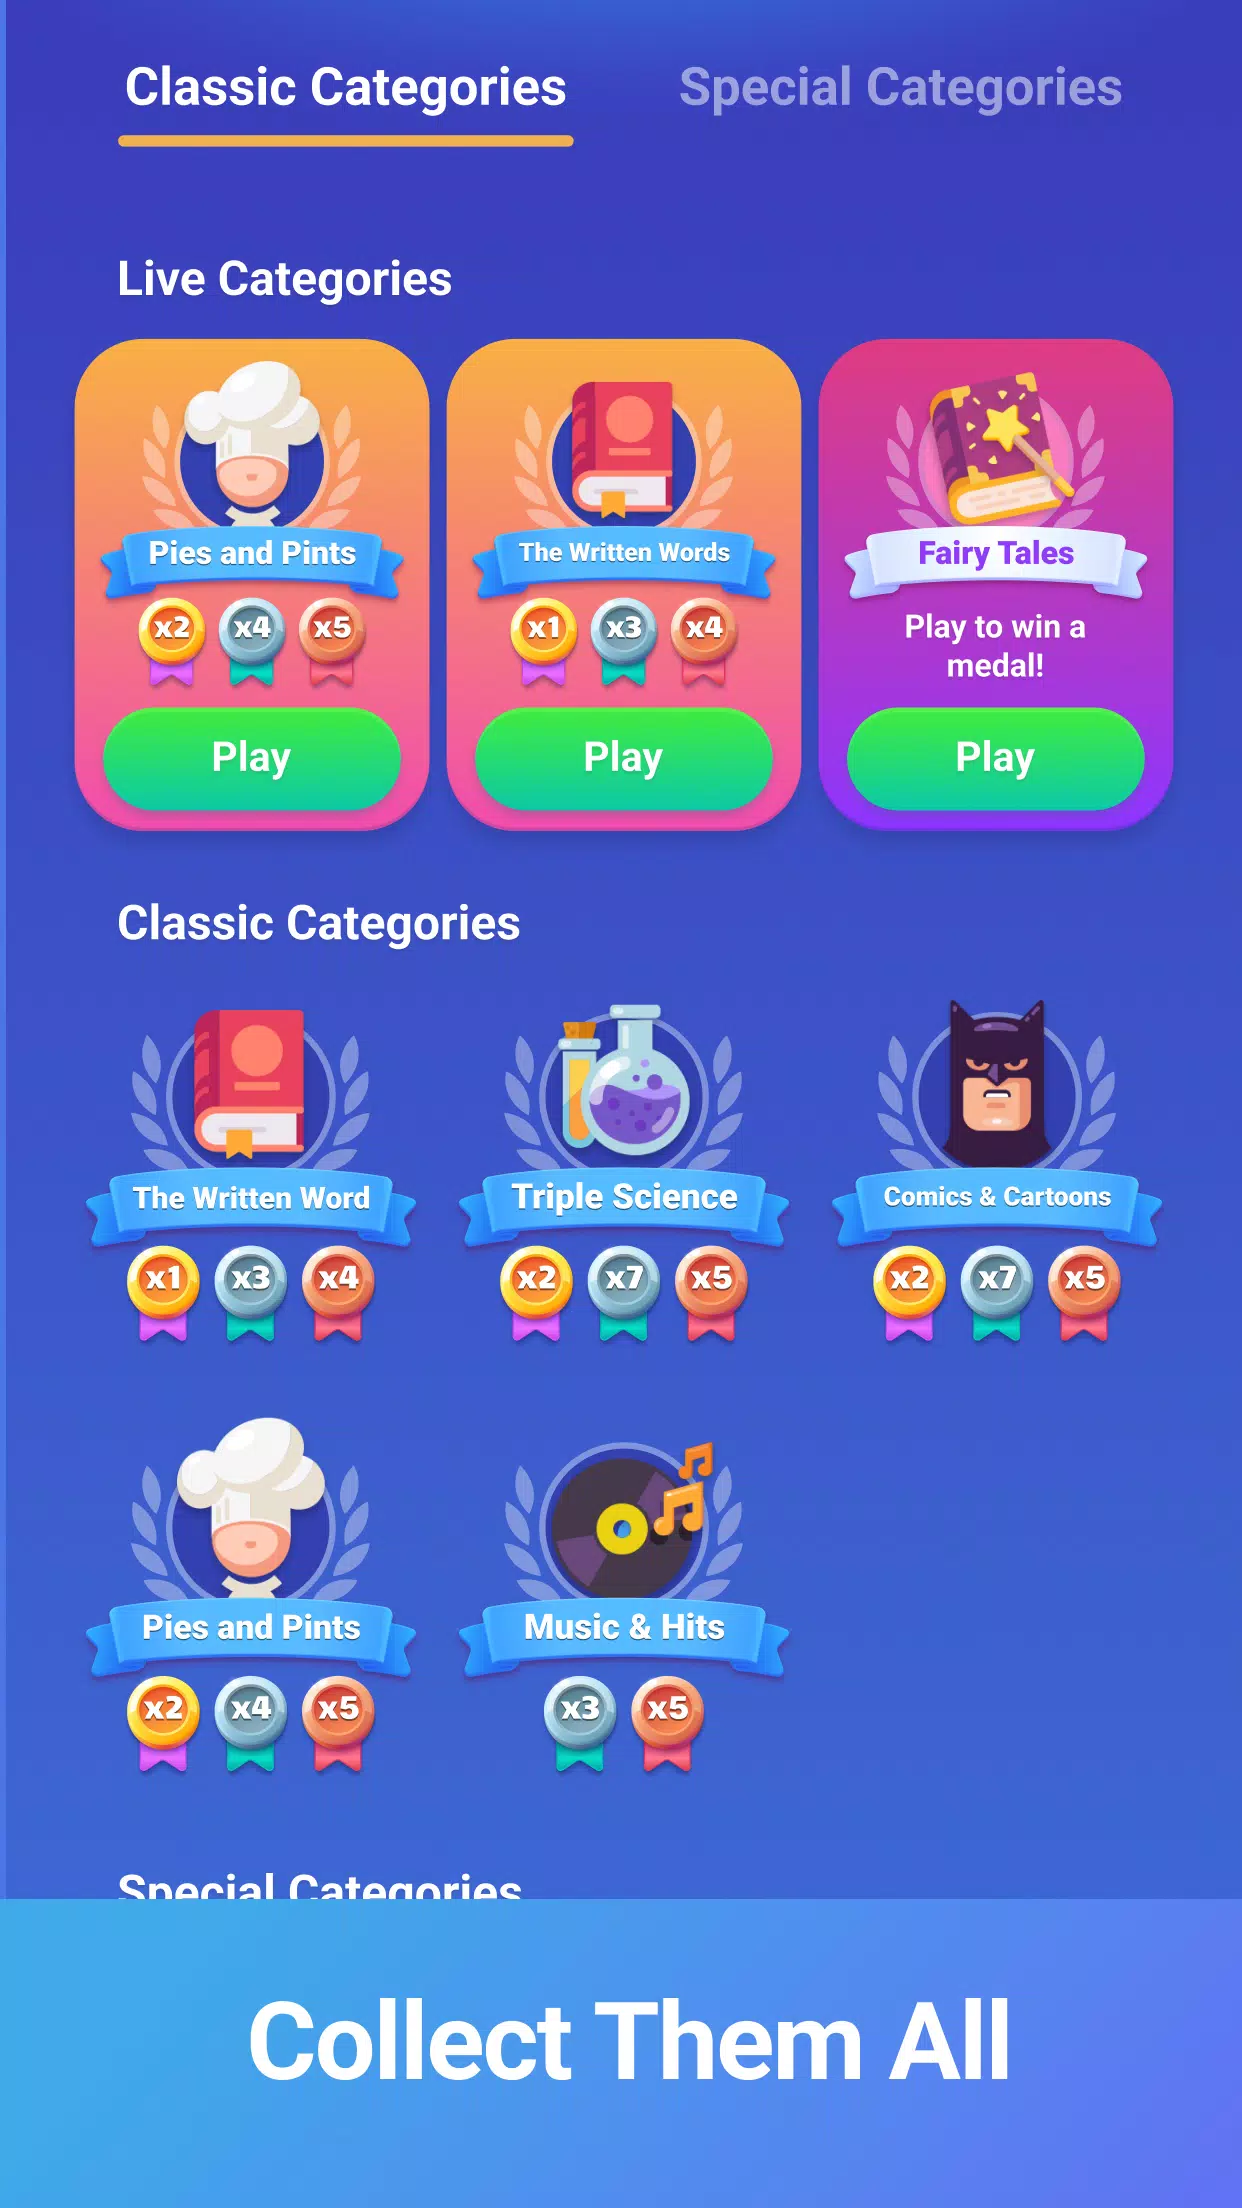 QuizGeek. Ultimate Trivia Game APK for Android - Download